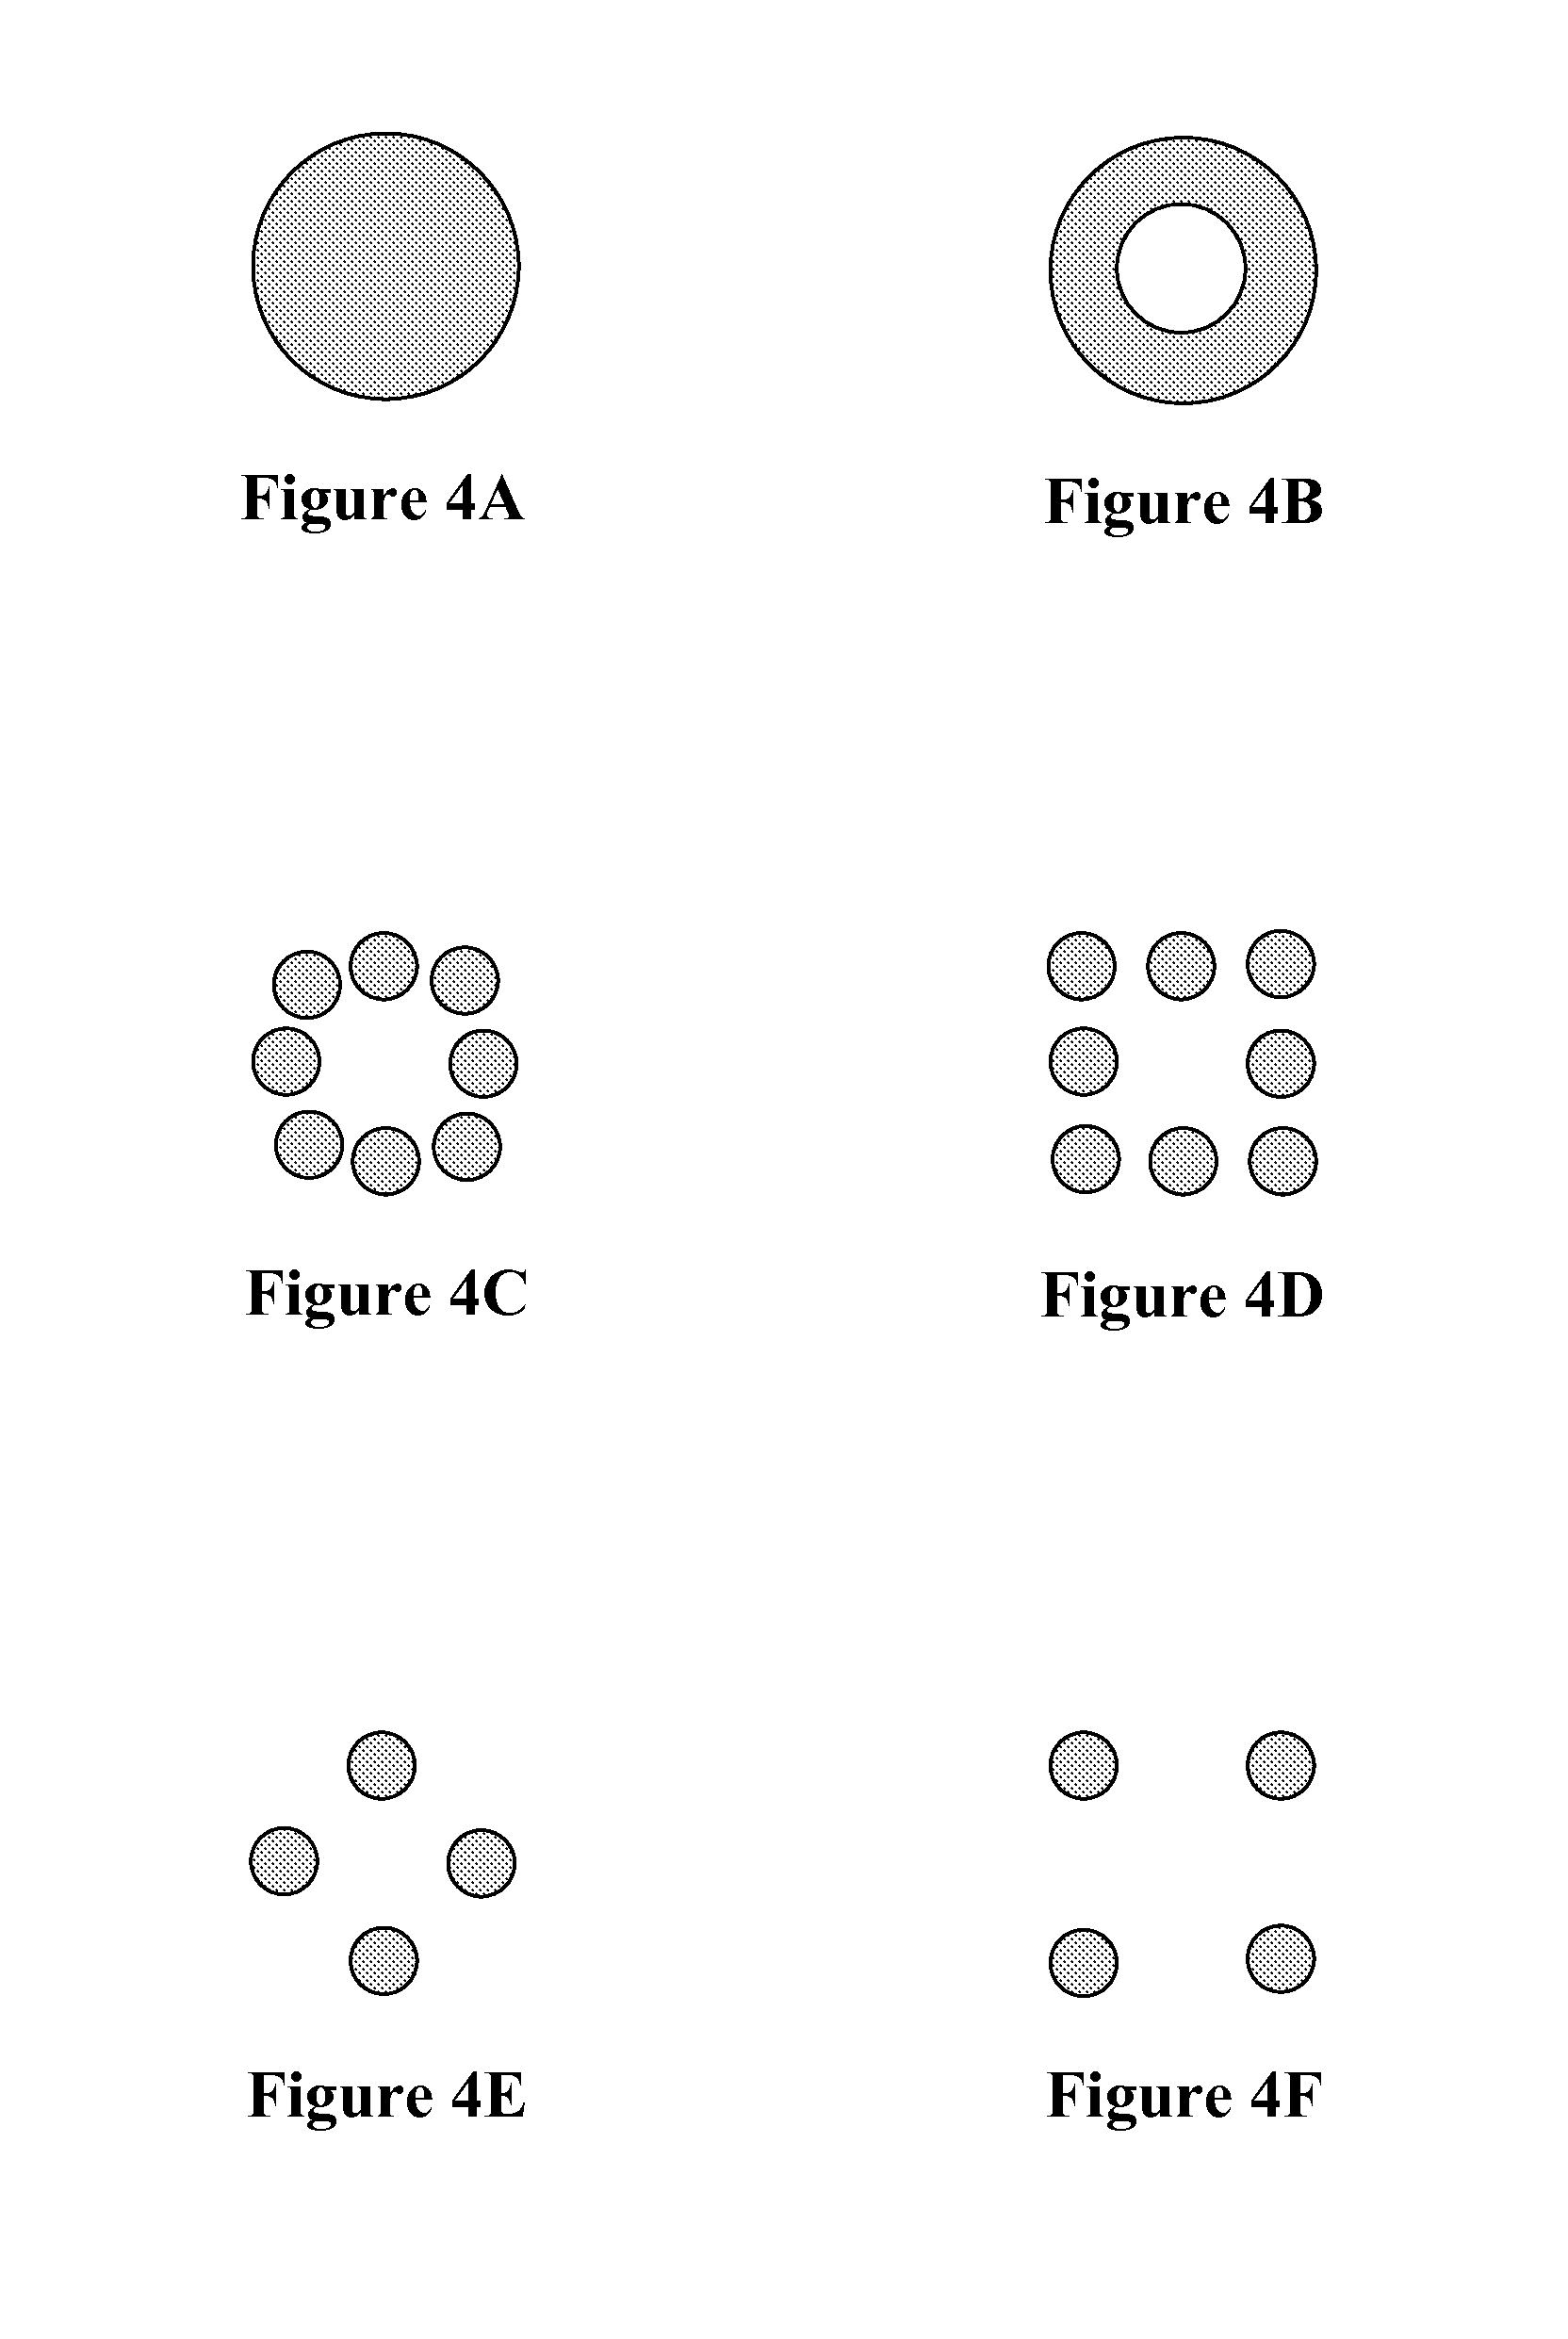 Devices, Systems and Methods for Processing of Magnetic Particles